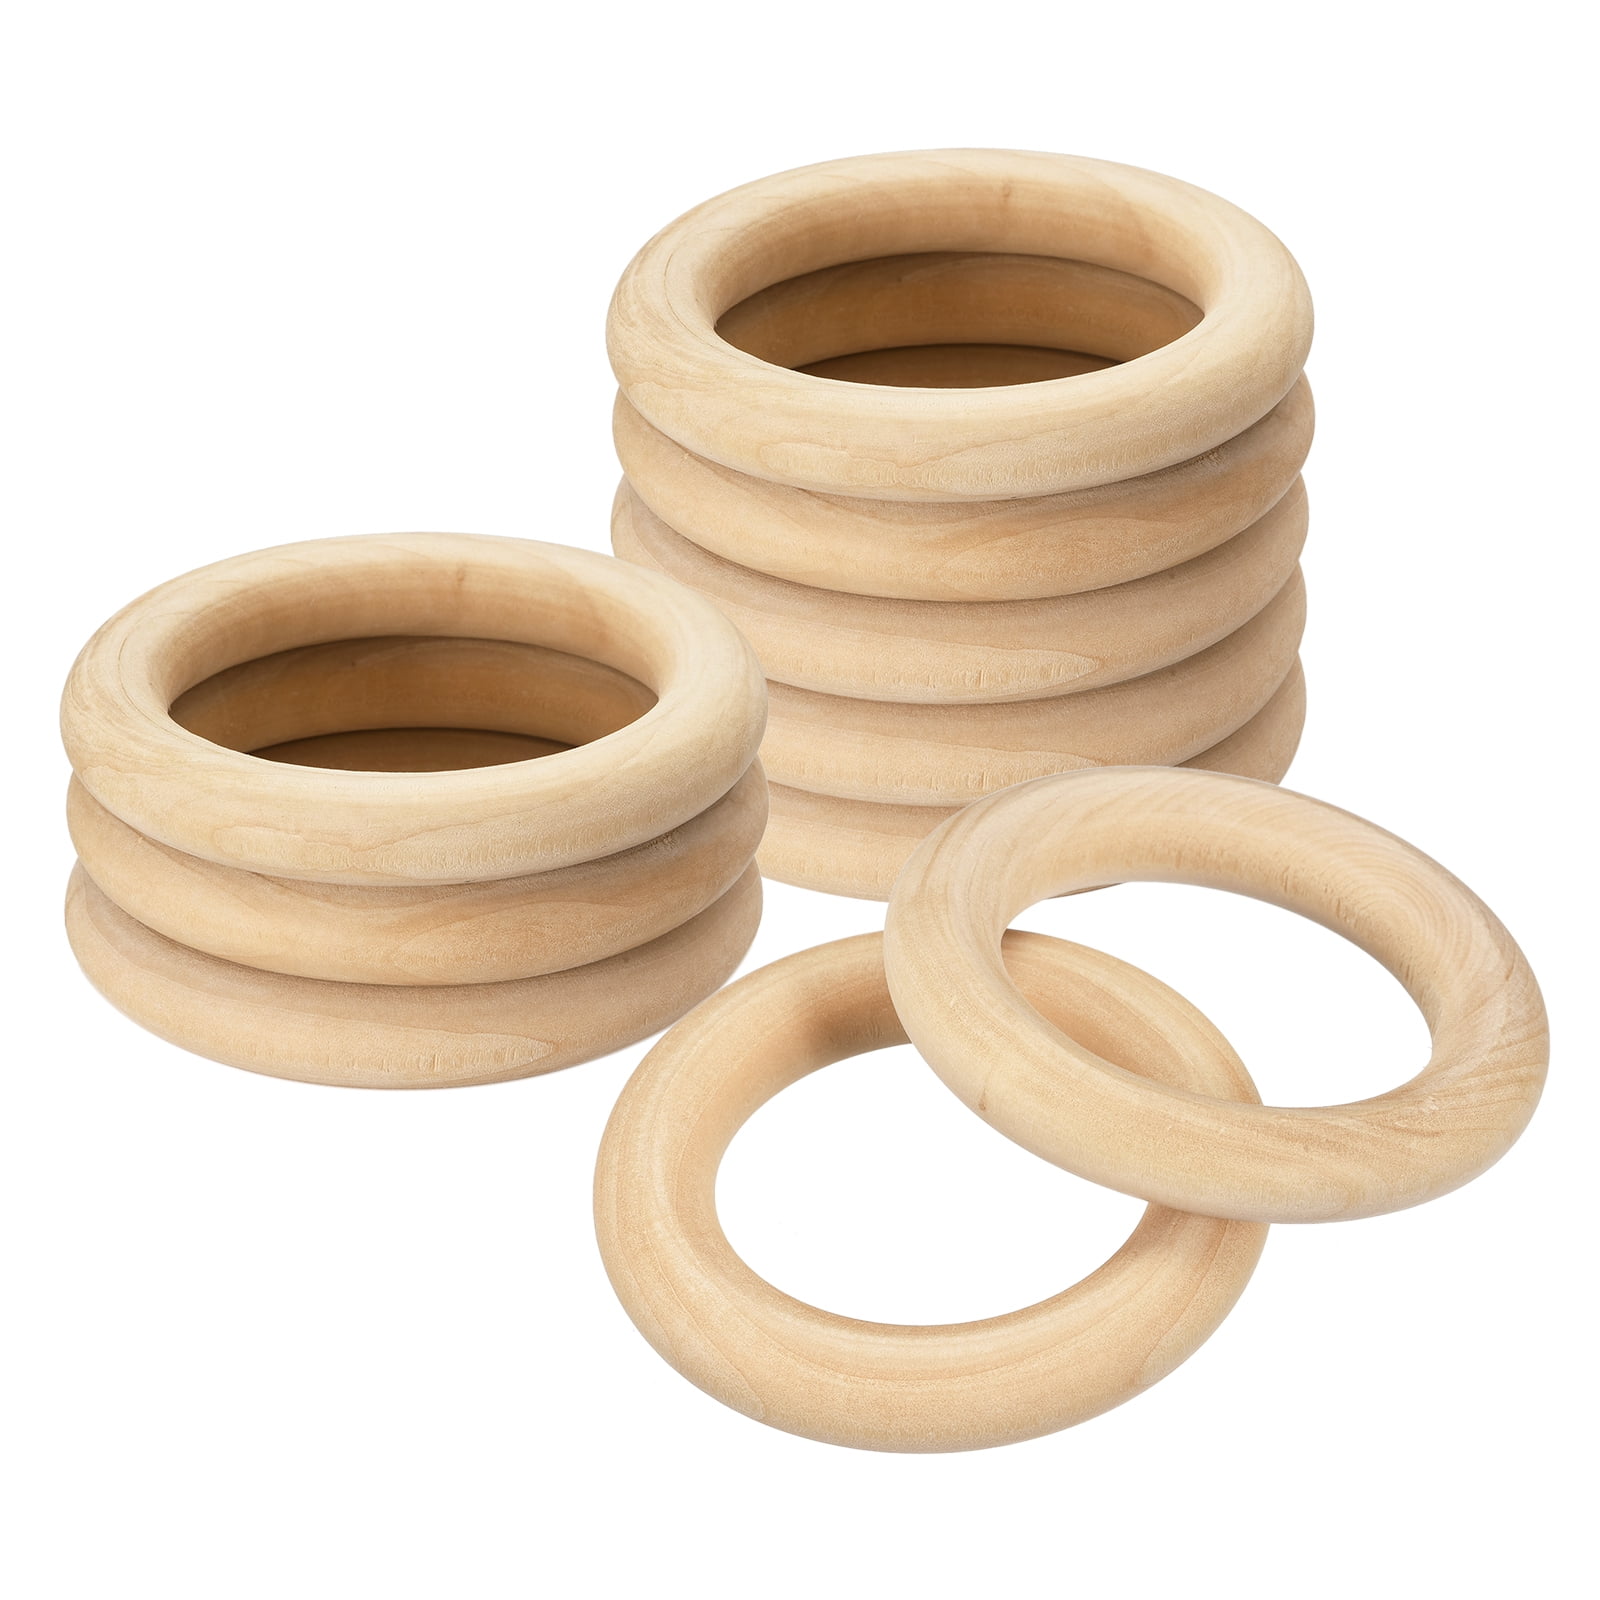 LuanQI 100-3pcs Natural Wooden Rings 15-100MM Primary Color